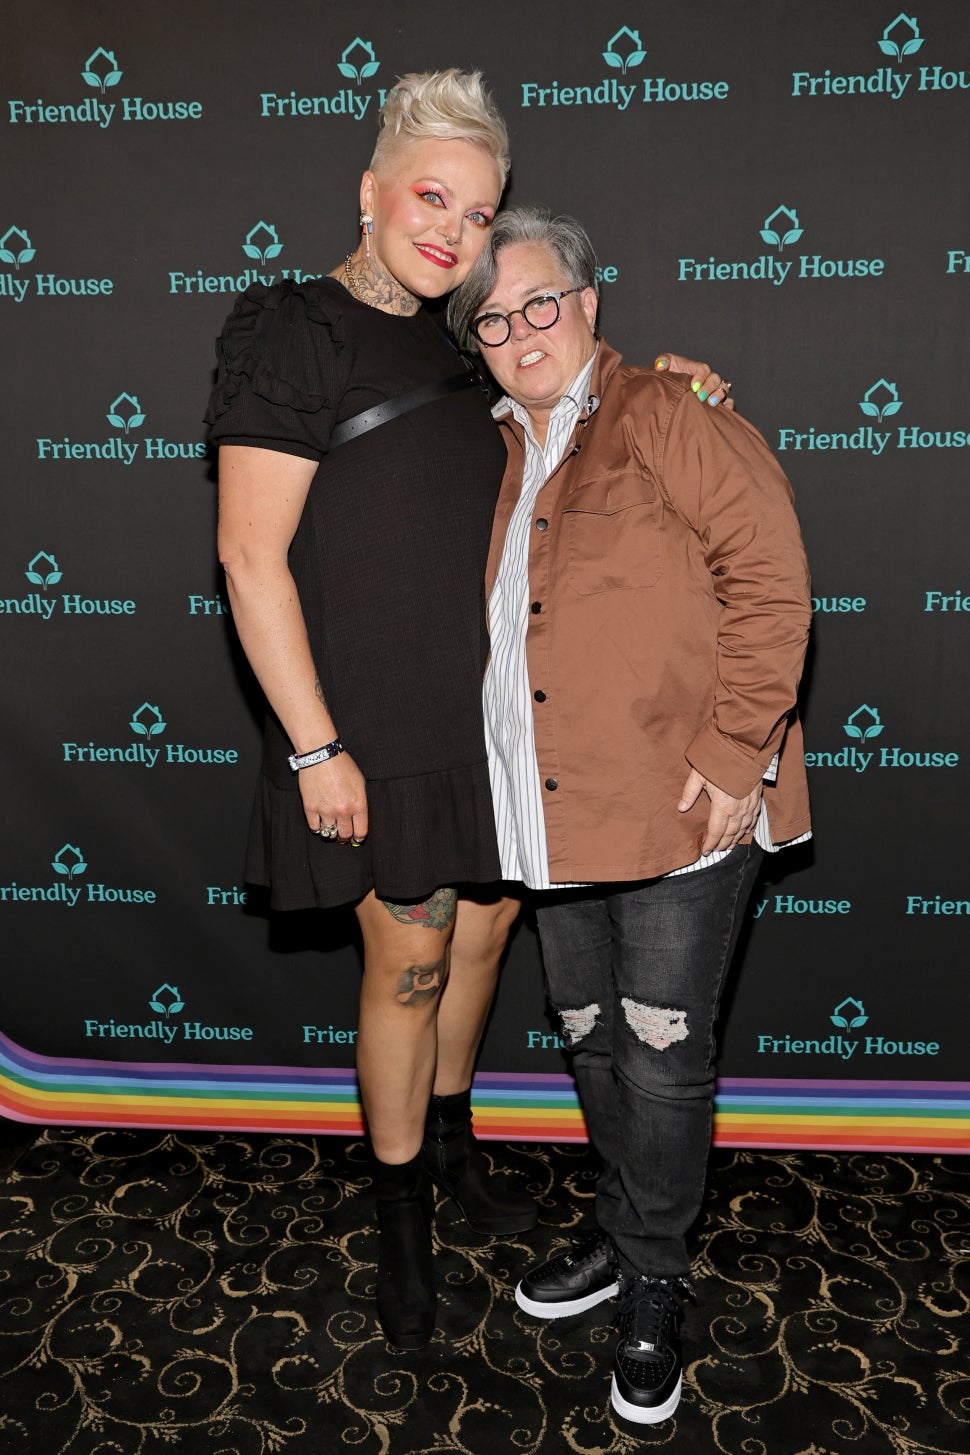 Aimee Hauer and Rosie O'Donnell attend FRIENDLY HOUSE LA Comedy Benefit, hosted by Rosie O'Donnell, at The Fonda Theatre on July 16, 2022 in Los Angeles, California.